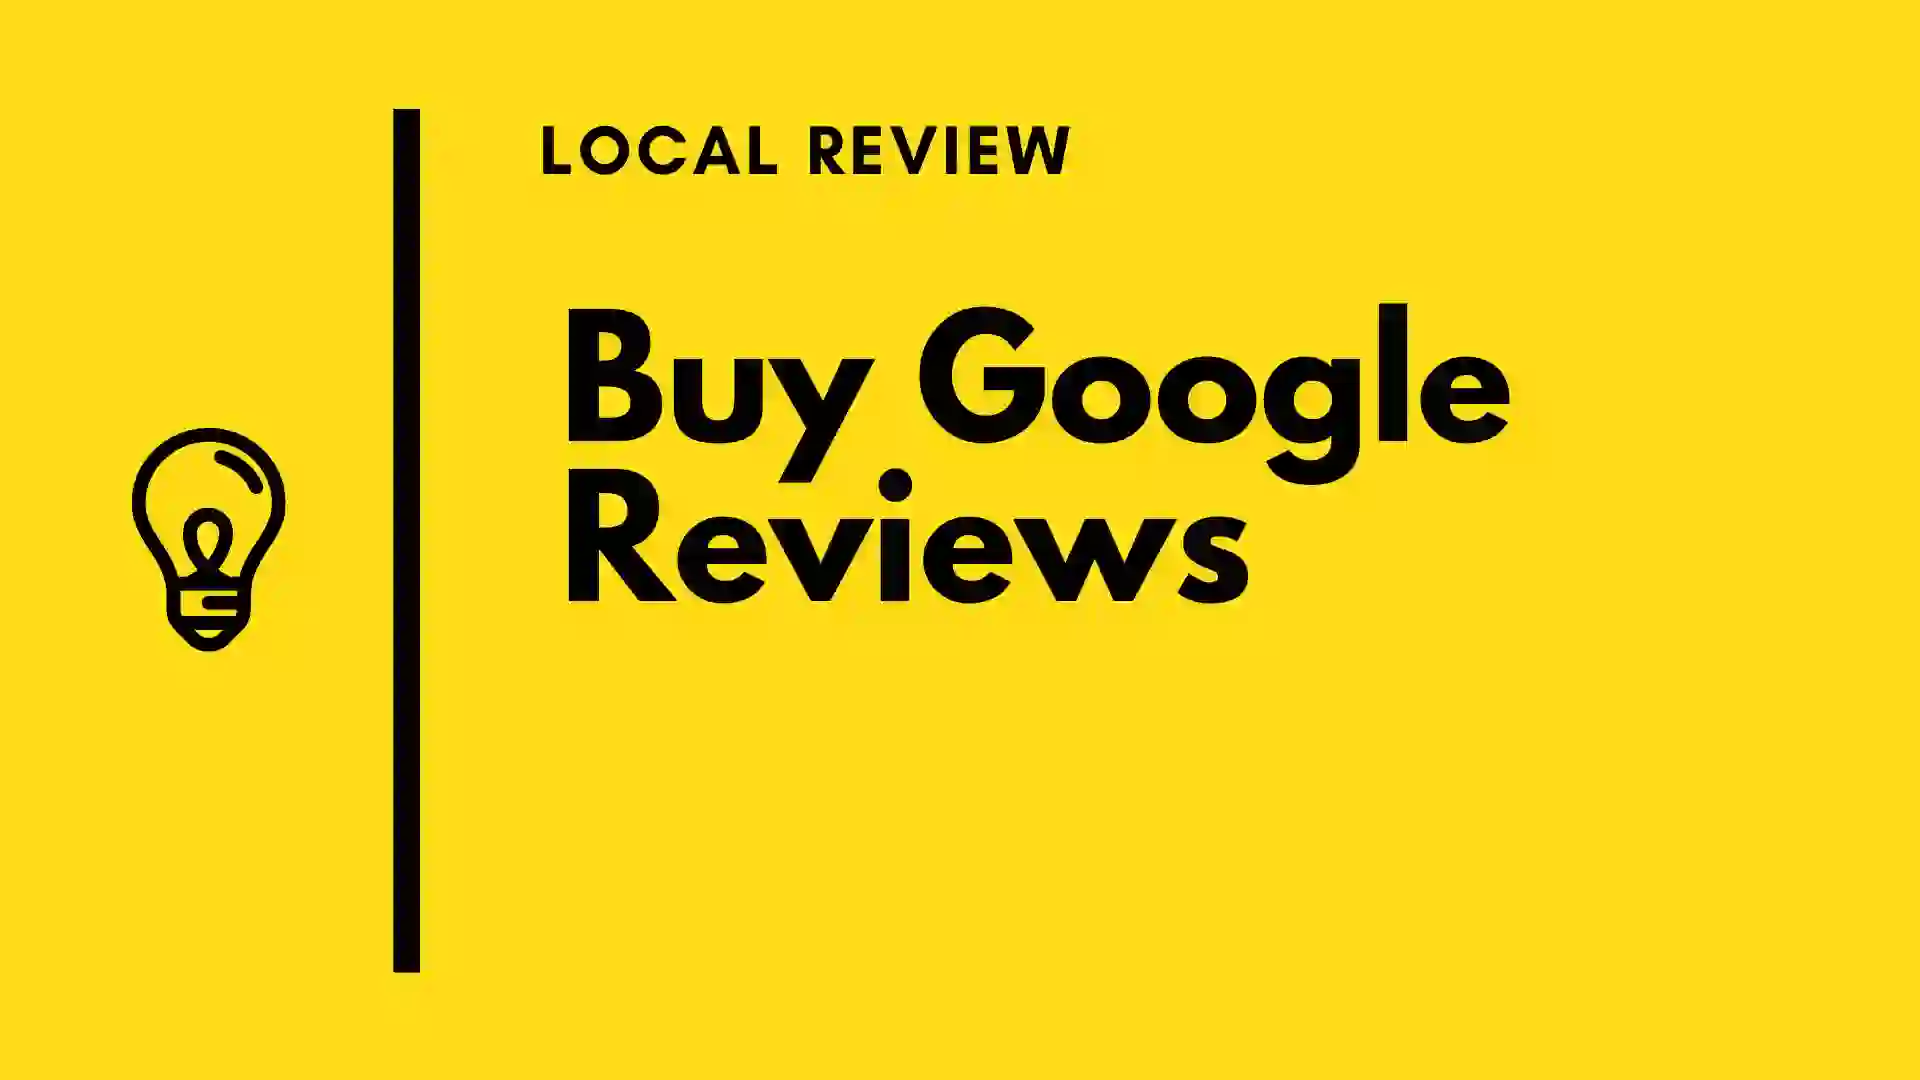 Instructions to Respond to Google Review